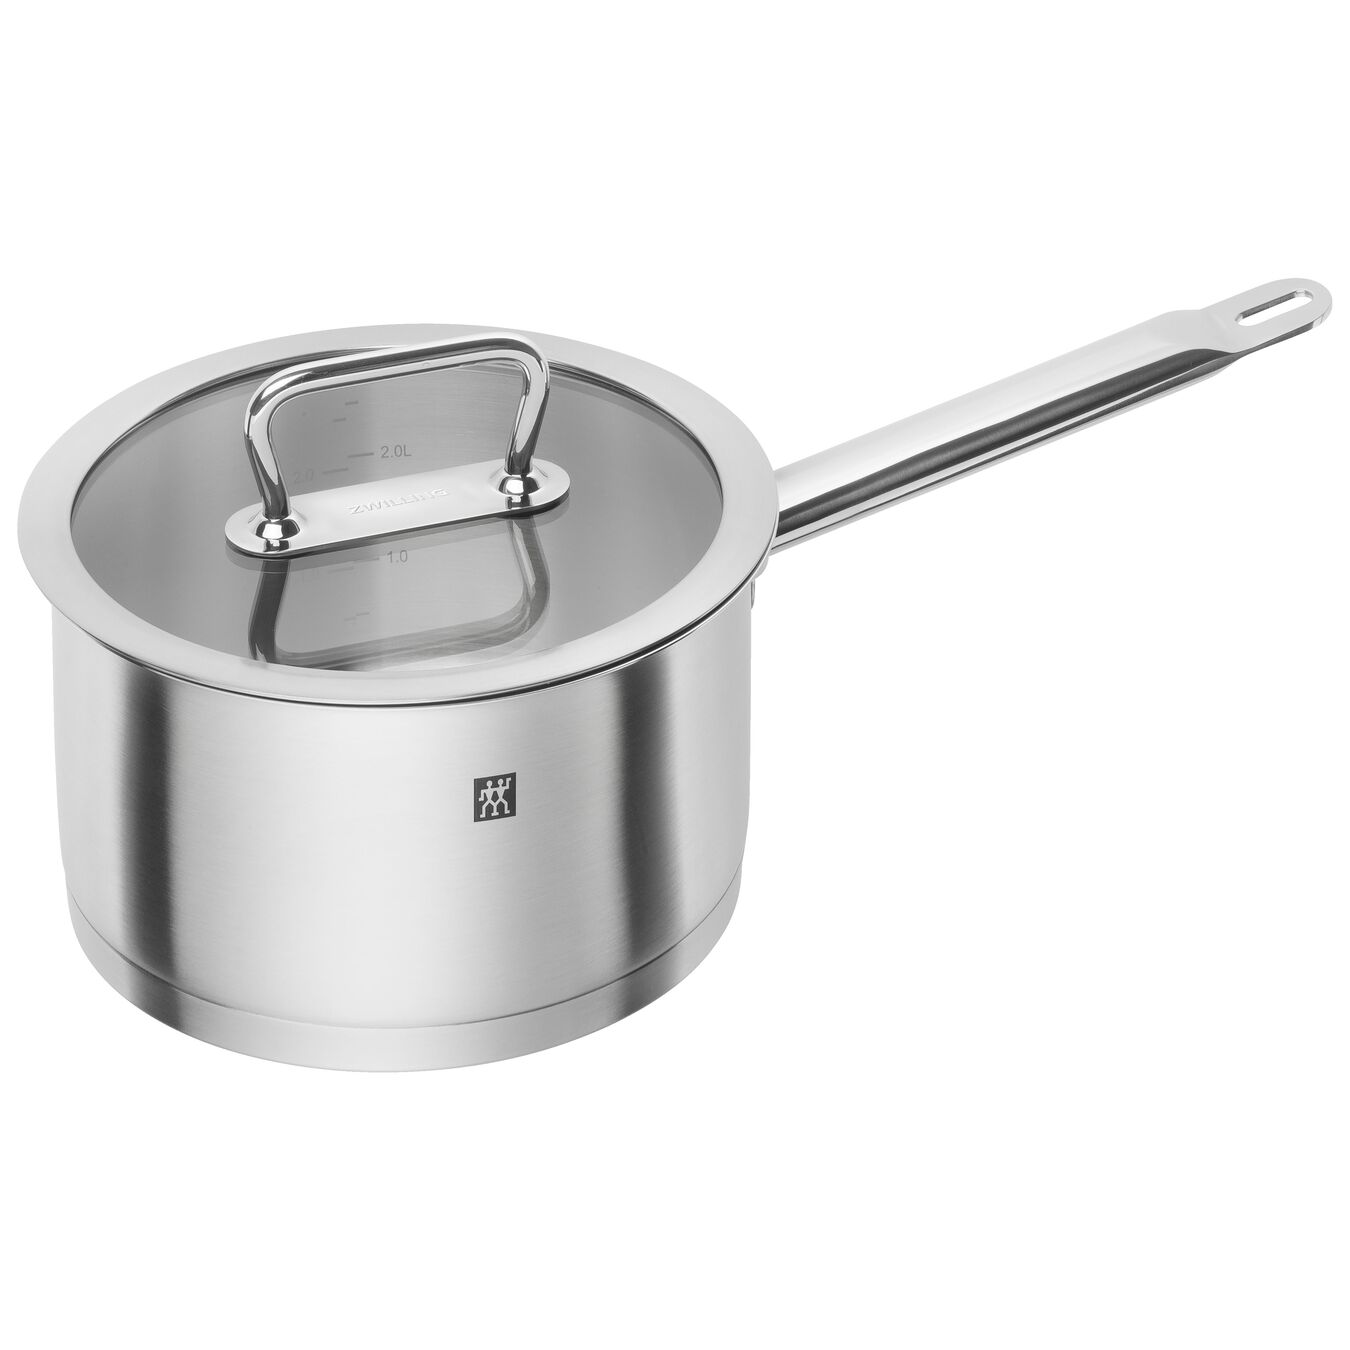 3 l 18/10 Stainless Steel round Sauce pan, silver,,large 1